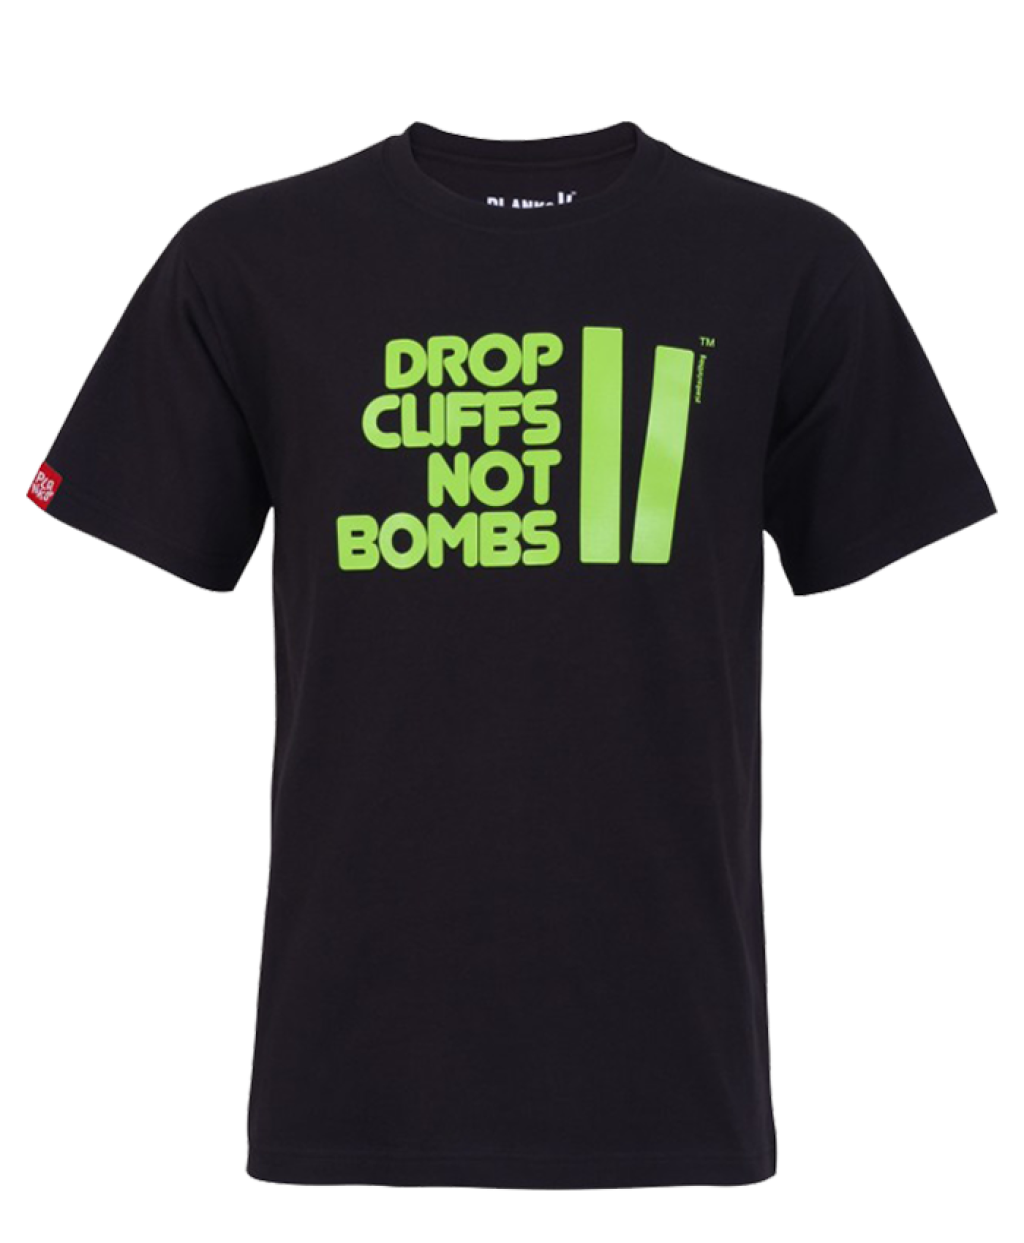 Drop Cliffs not Bombs T-shirt in the Planks Clothing version